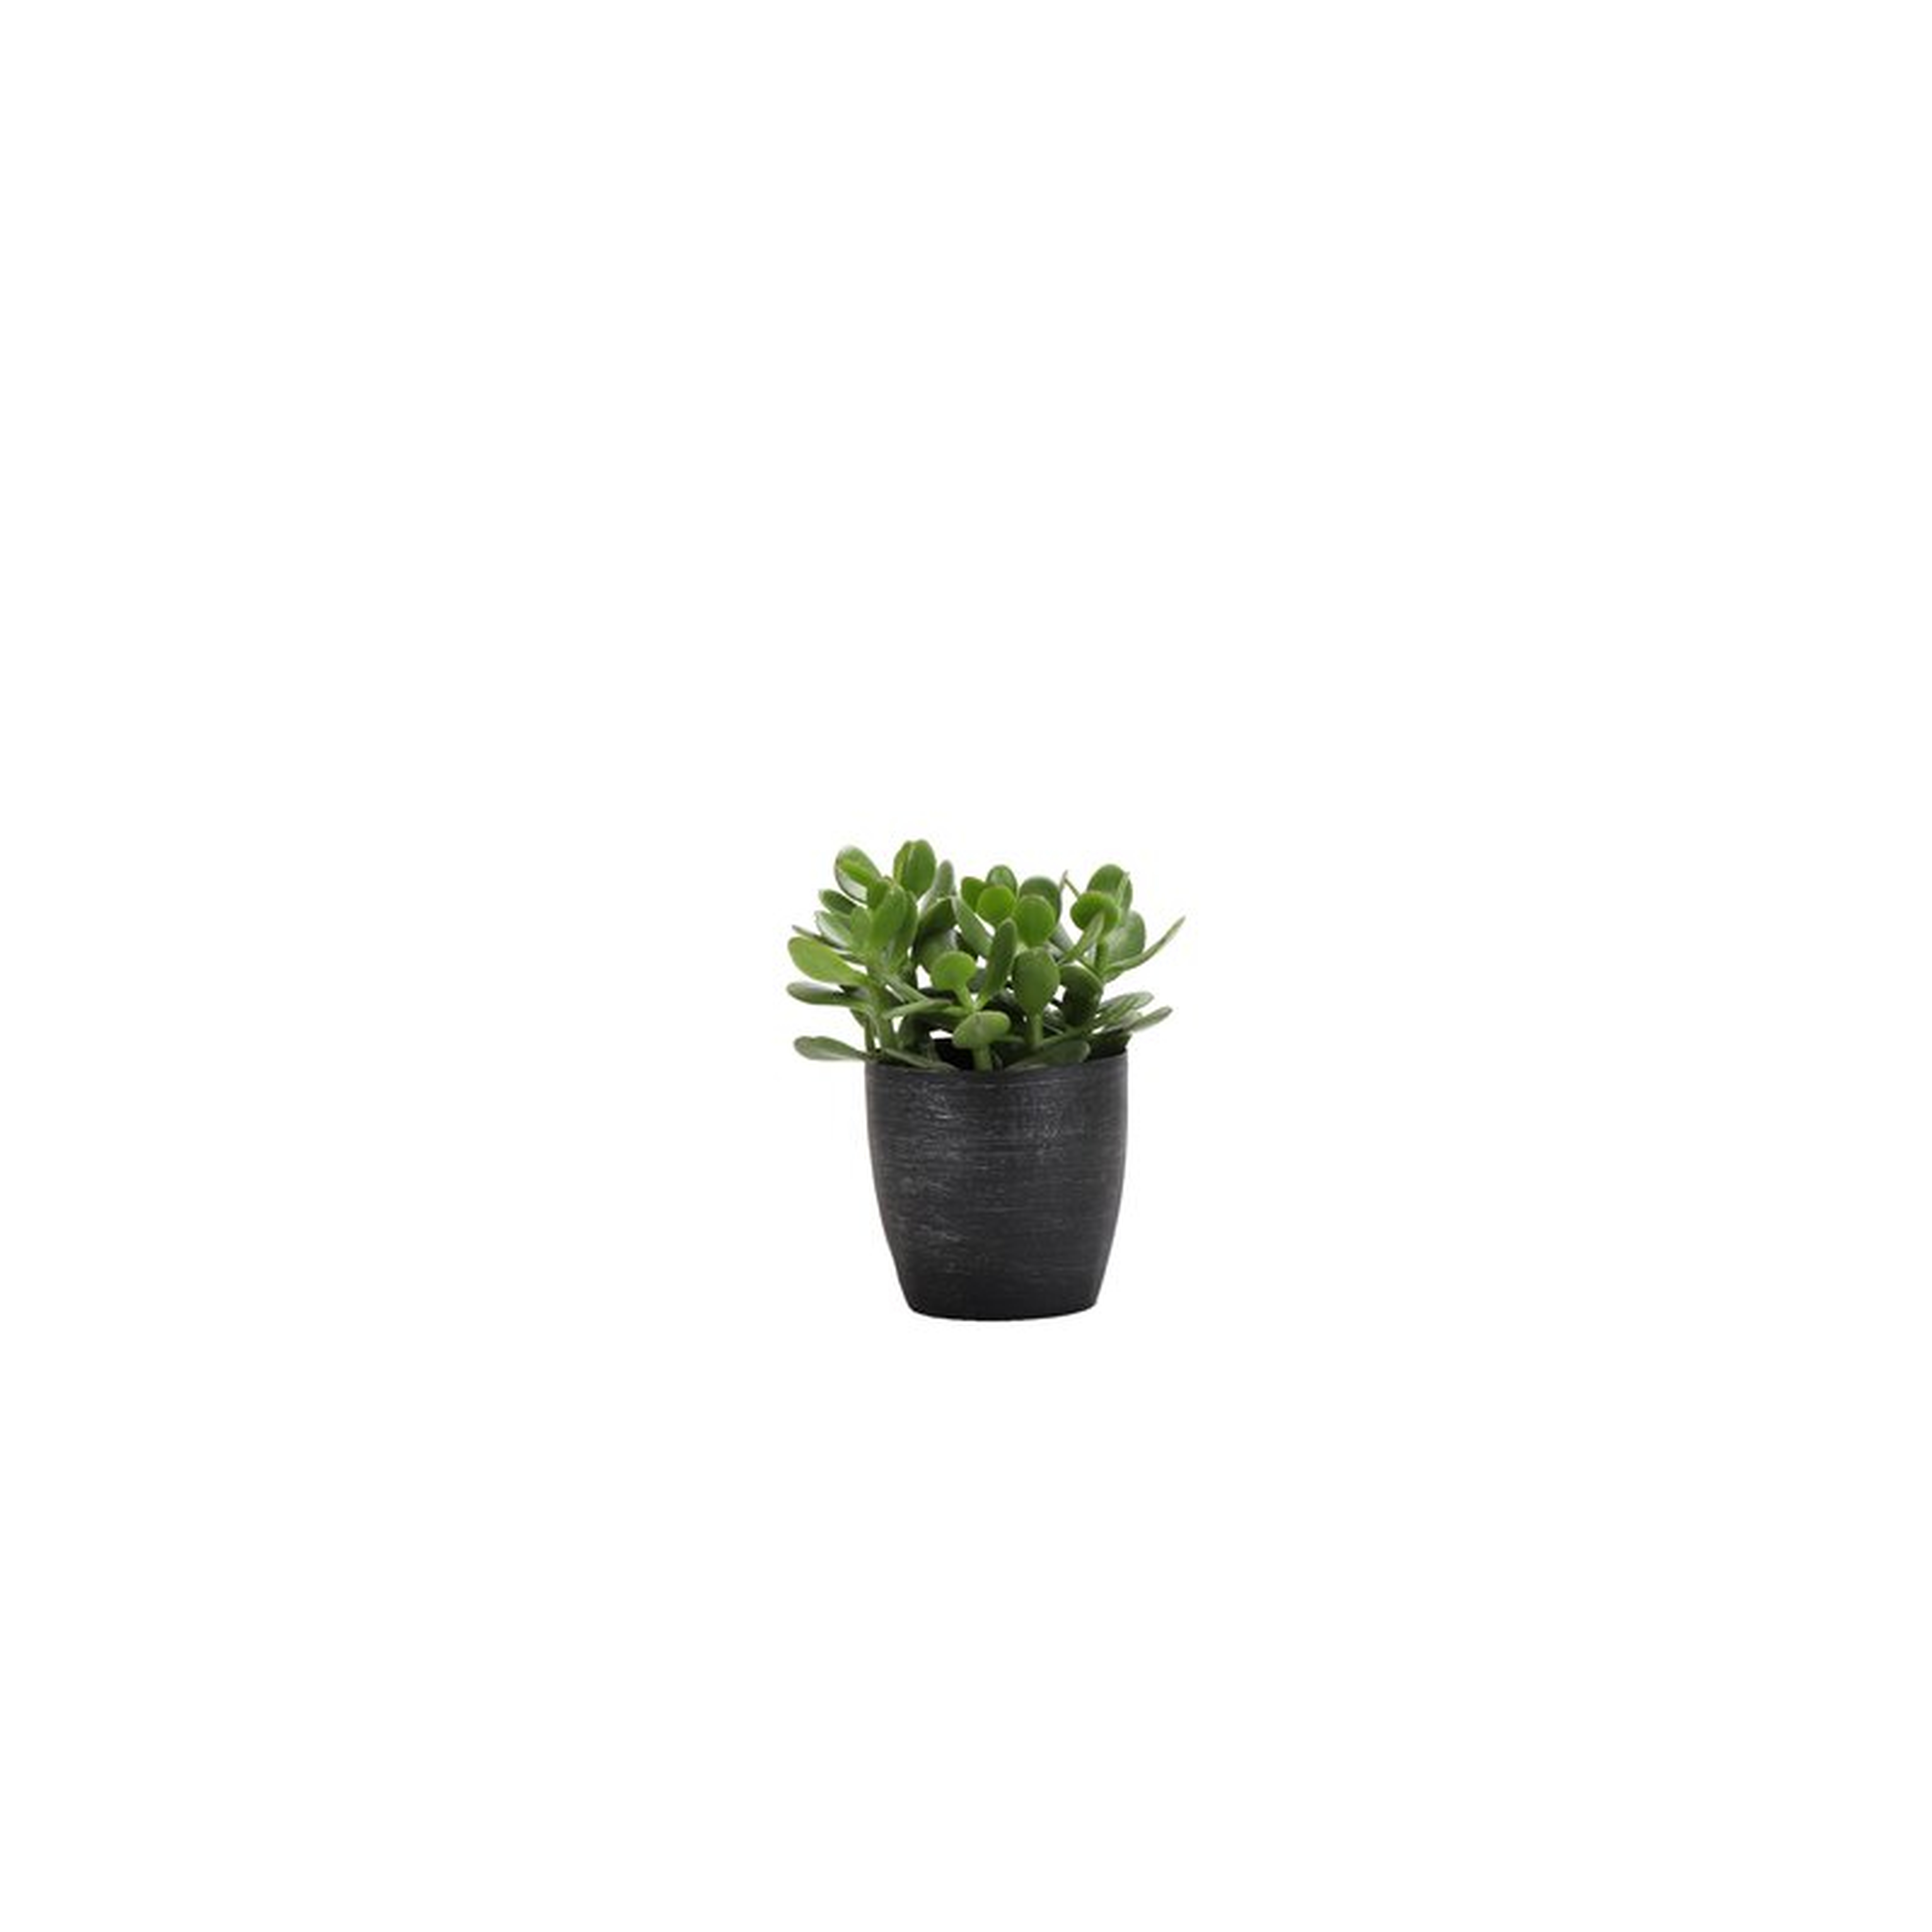 Thorsen's Greenhouse Live Jade Plant in Brushed Silver Pot, 7" - Perigold